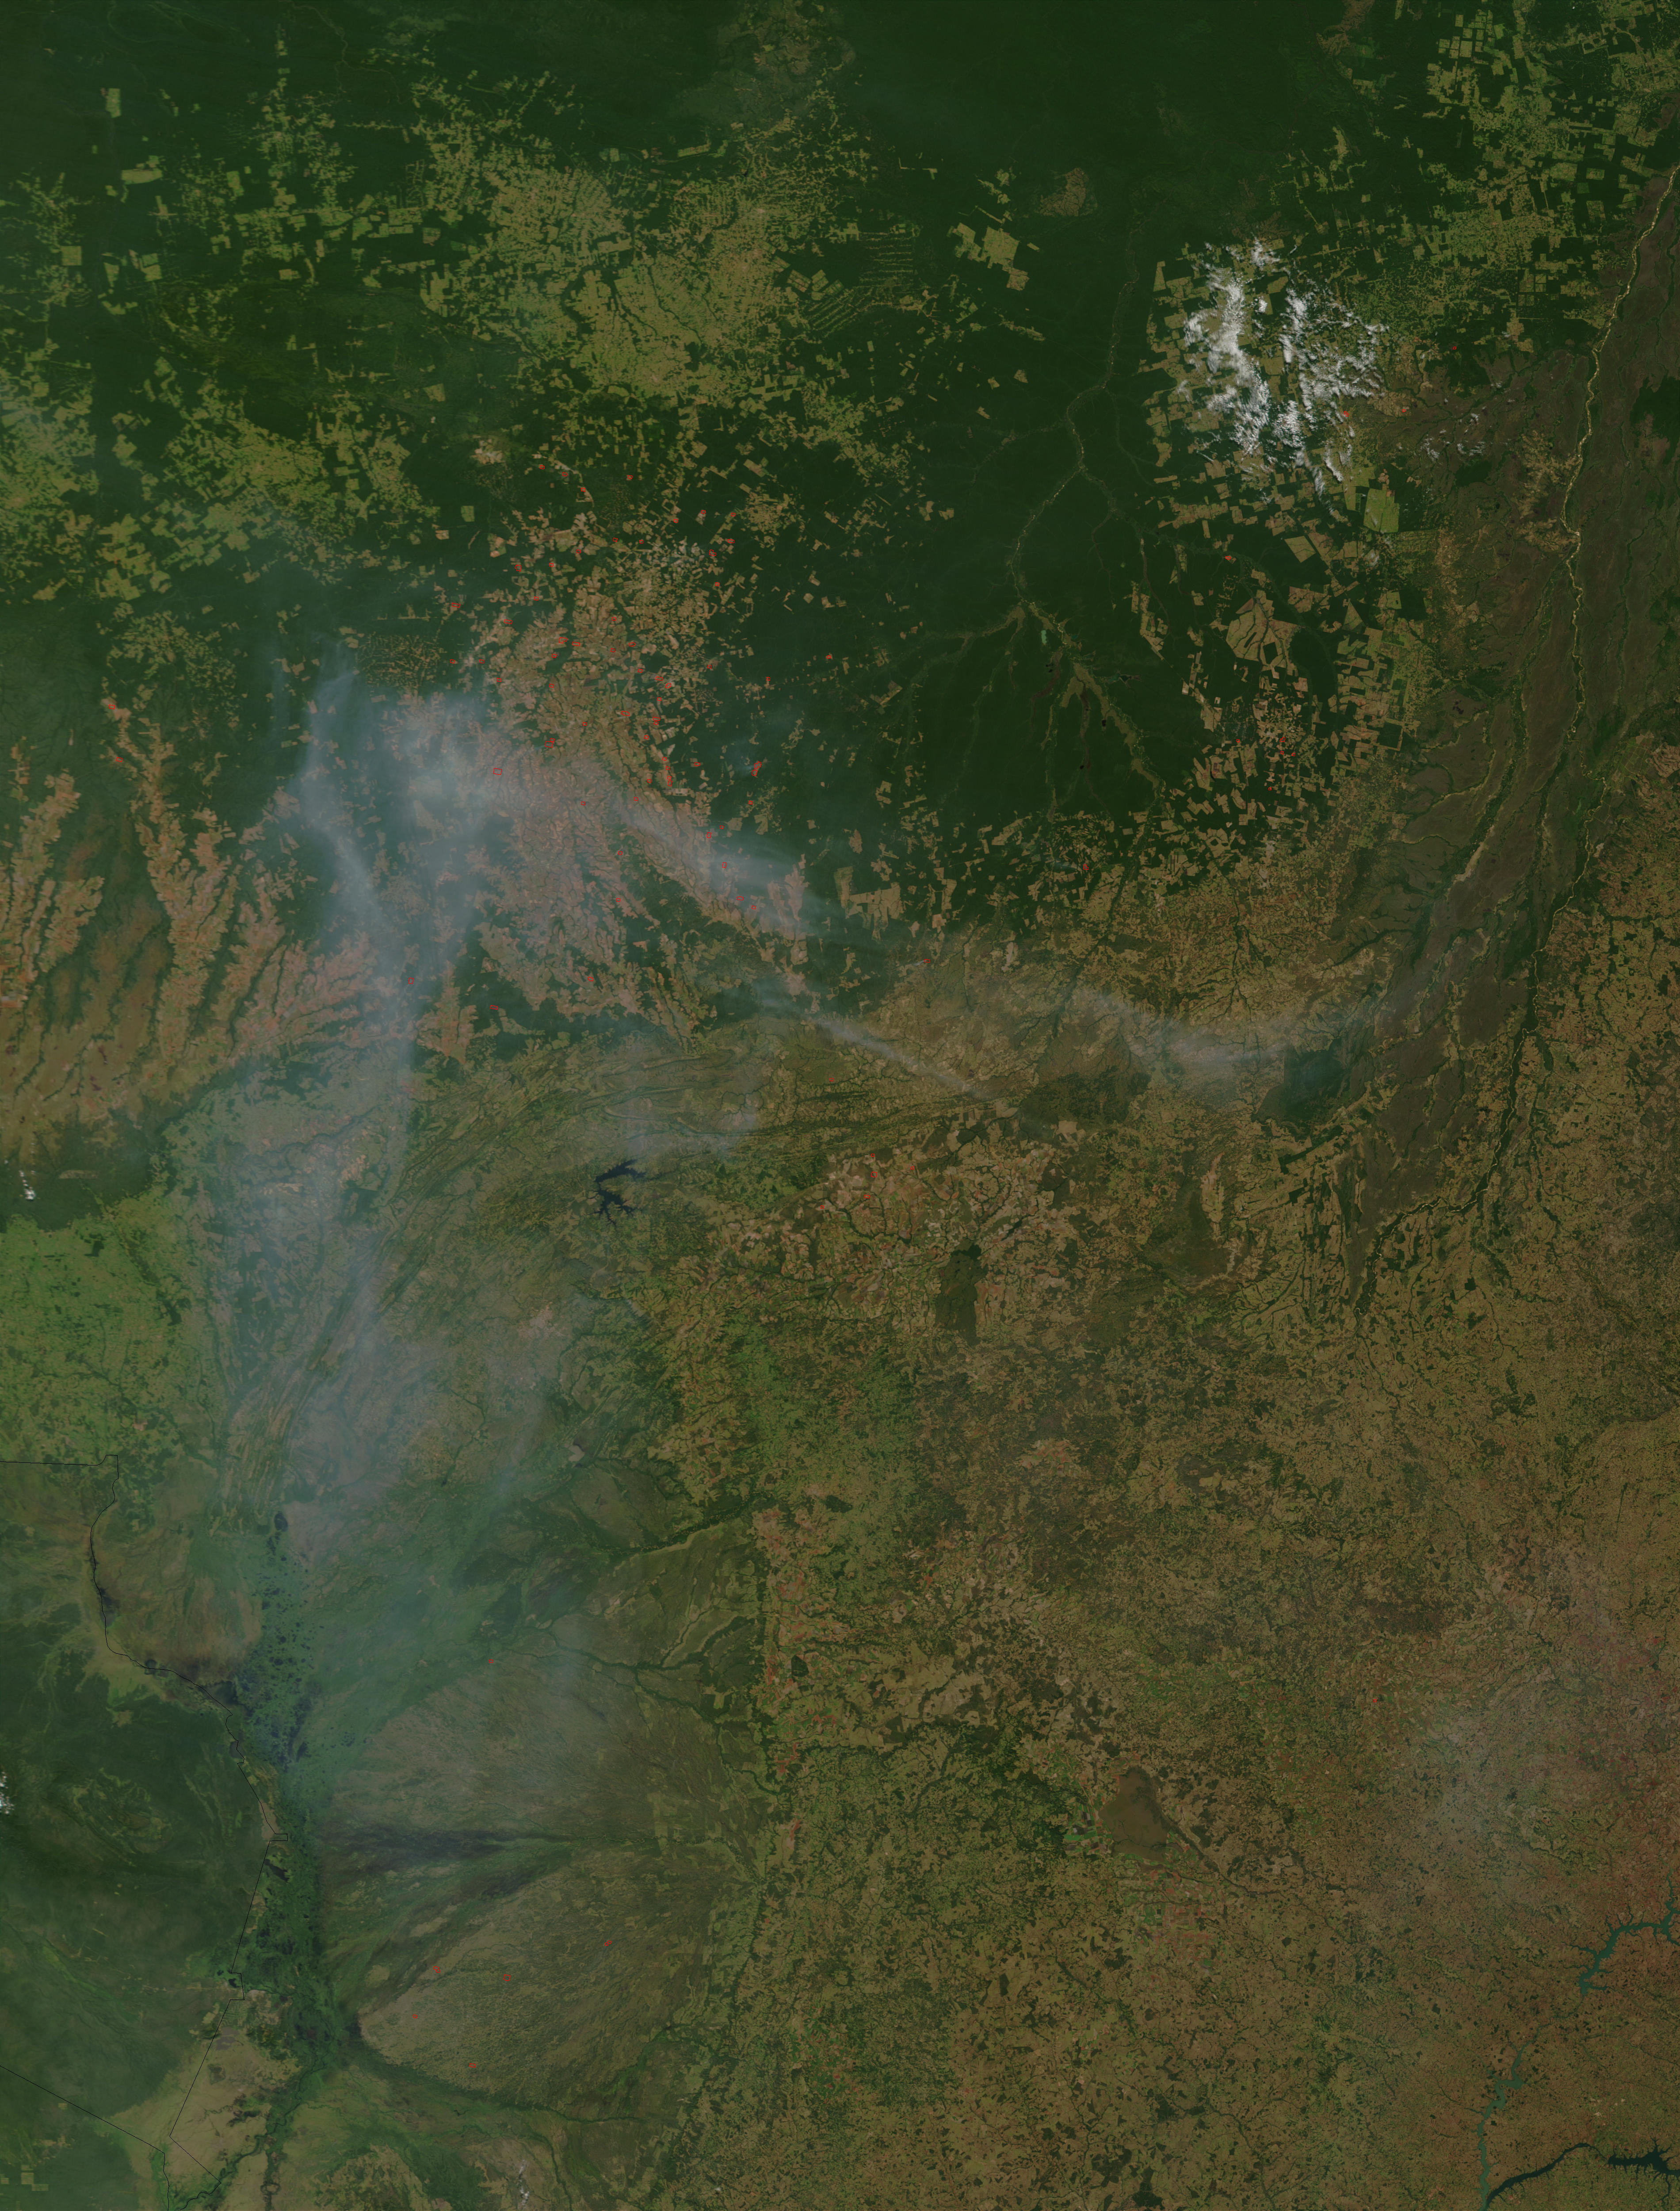 Fires and smoke in Mato Grosso State, Brazil - related image preview